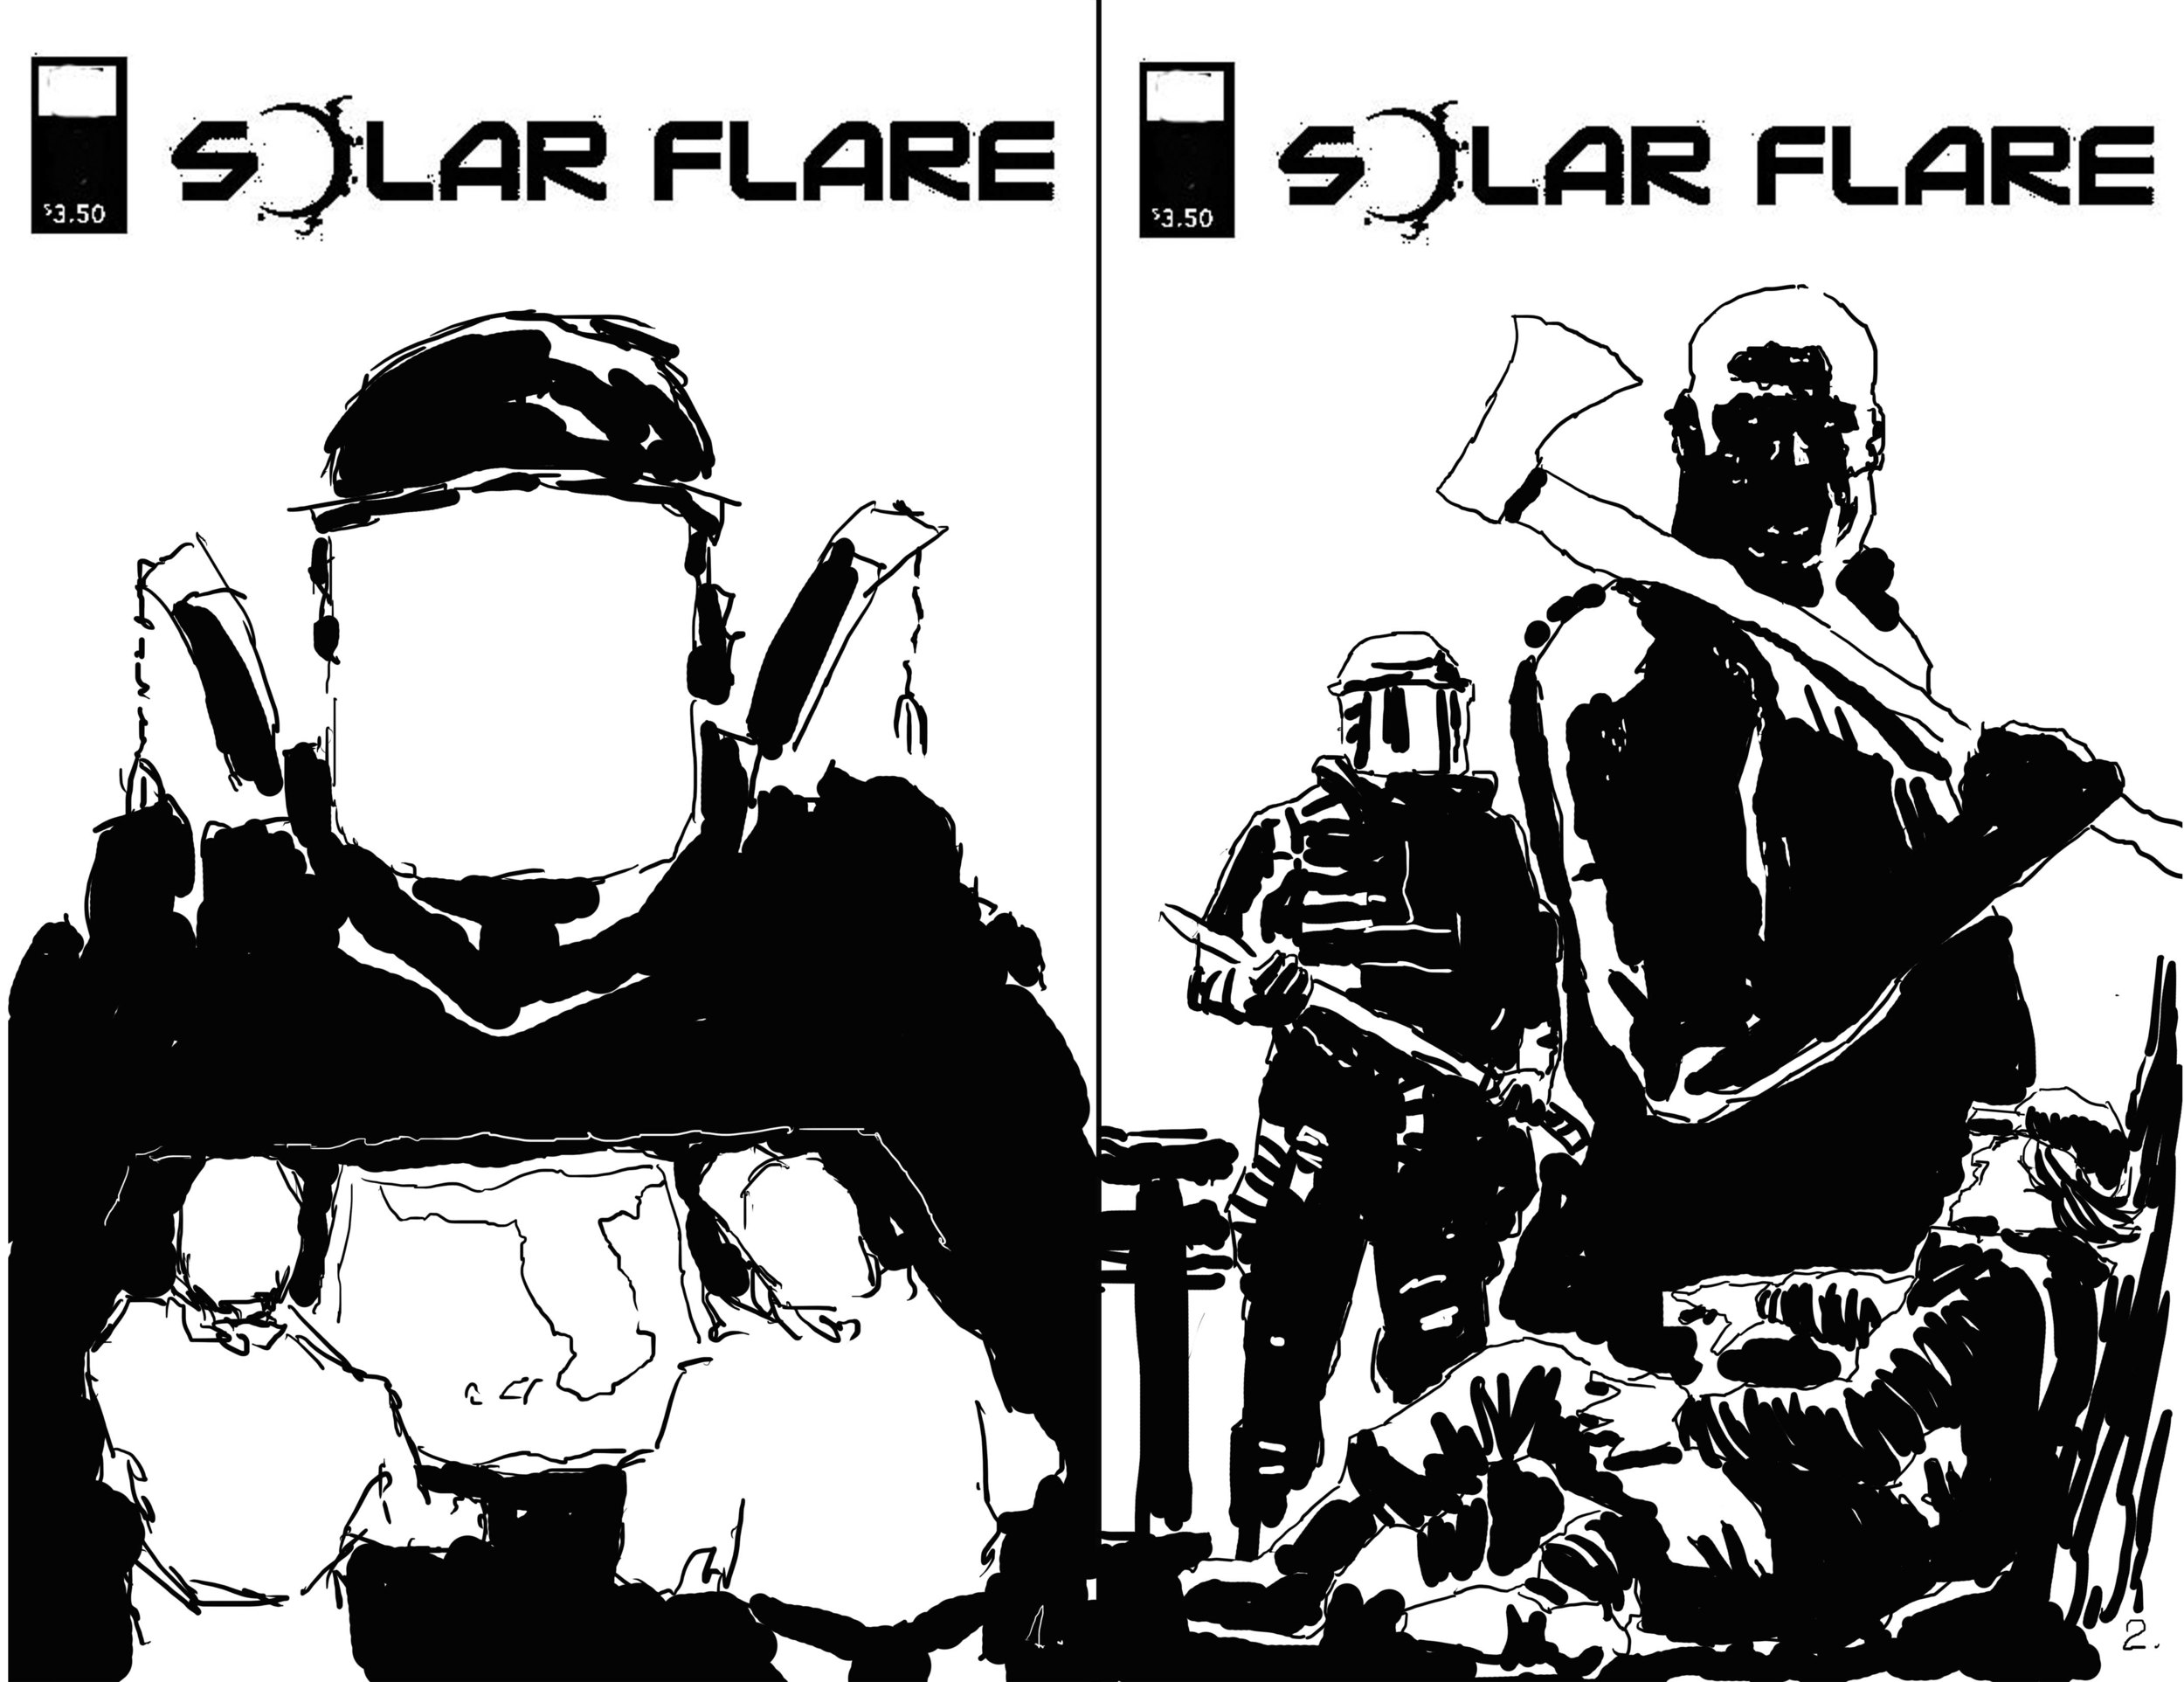 Solar Flare #5 - Covers Layout.jpg